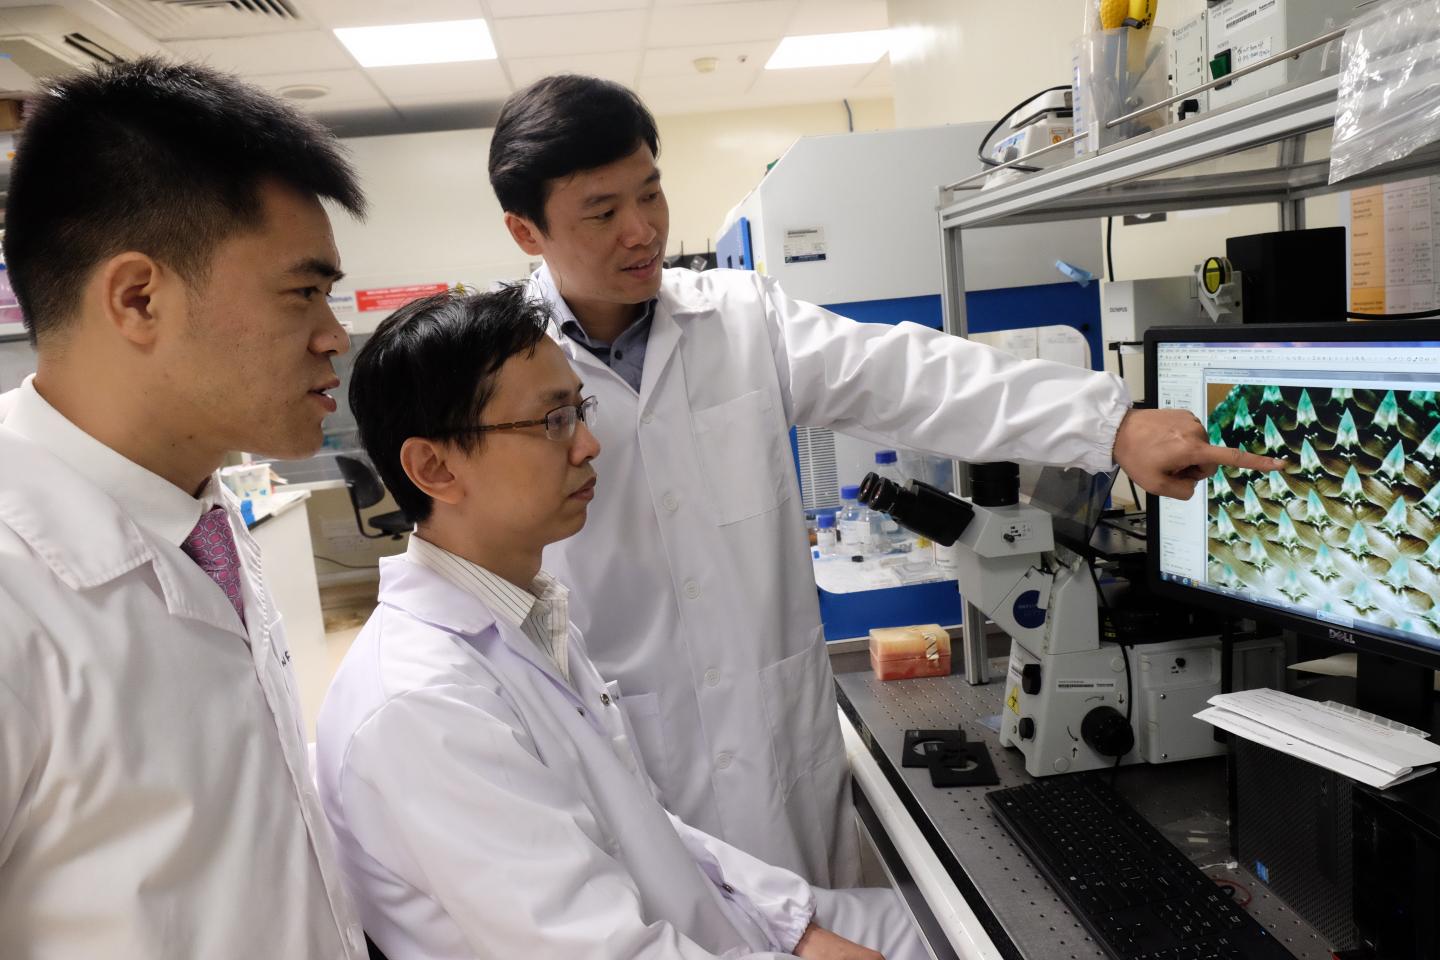 (L-R) Asst Prof Xu Chenjie, Dr Than Aung, Prof Chen Peng discussing a microscope image of the microneedle patch